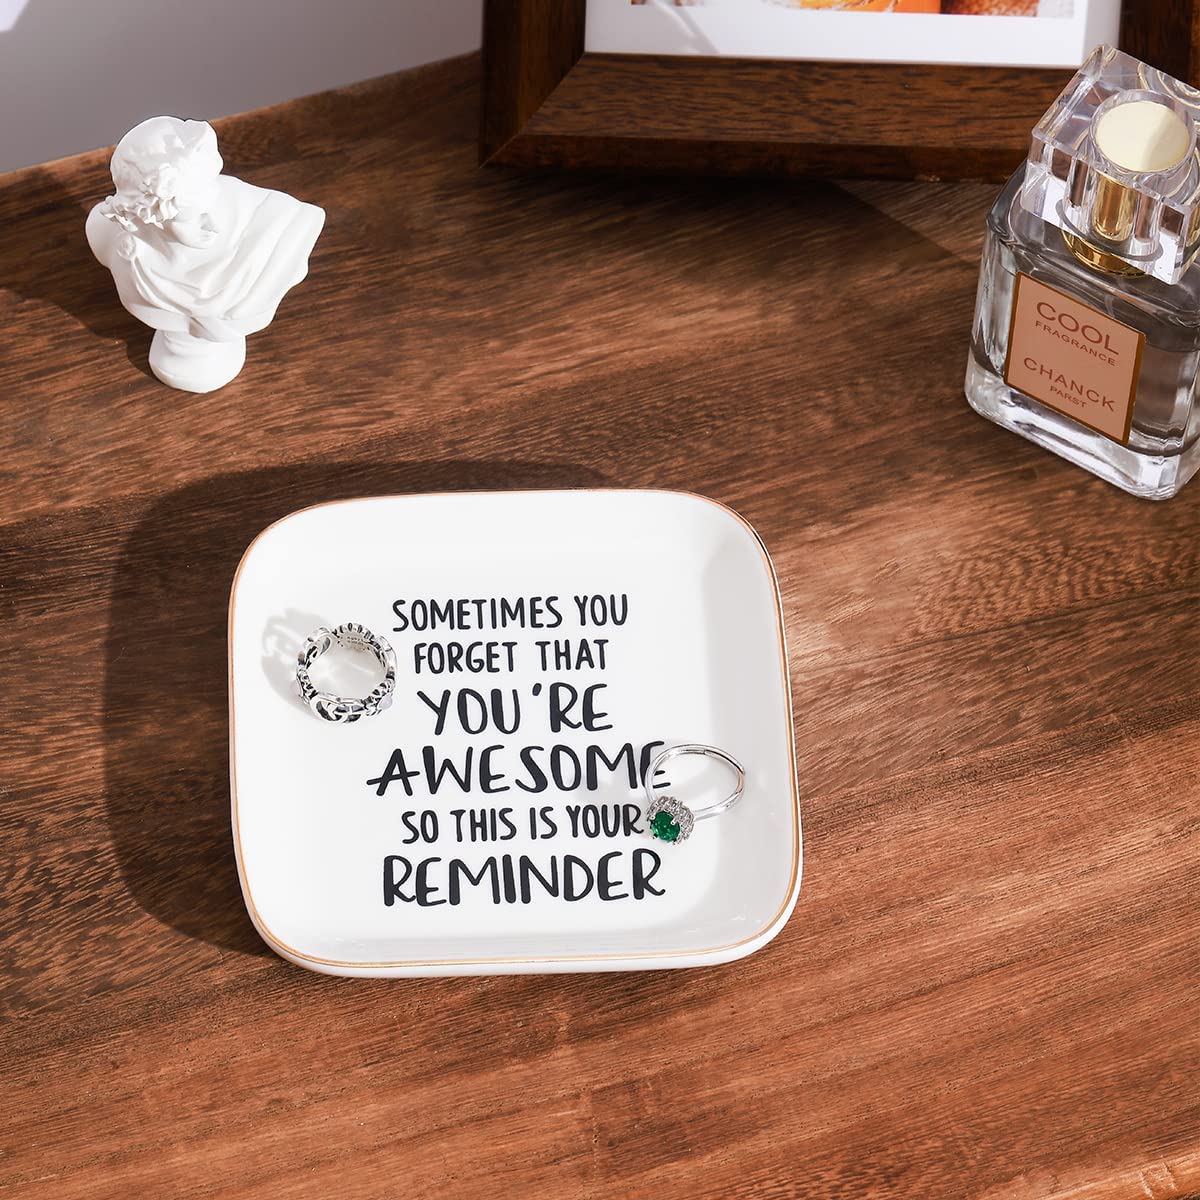 A ring trinket dish on a dark wooden table. A quote is printed on the dish which says, "Sometimes you forget that you're awesome, so this is your reminder".